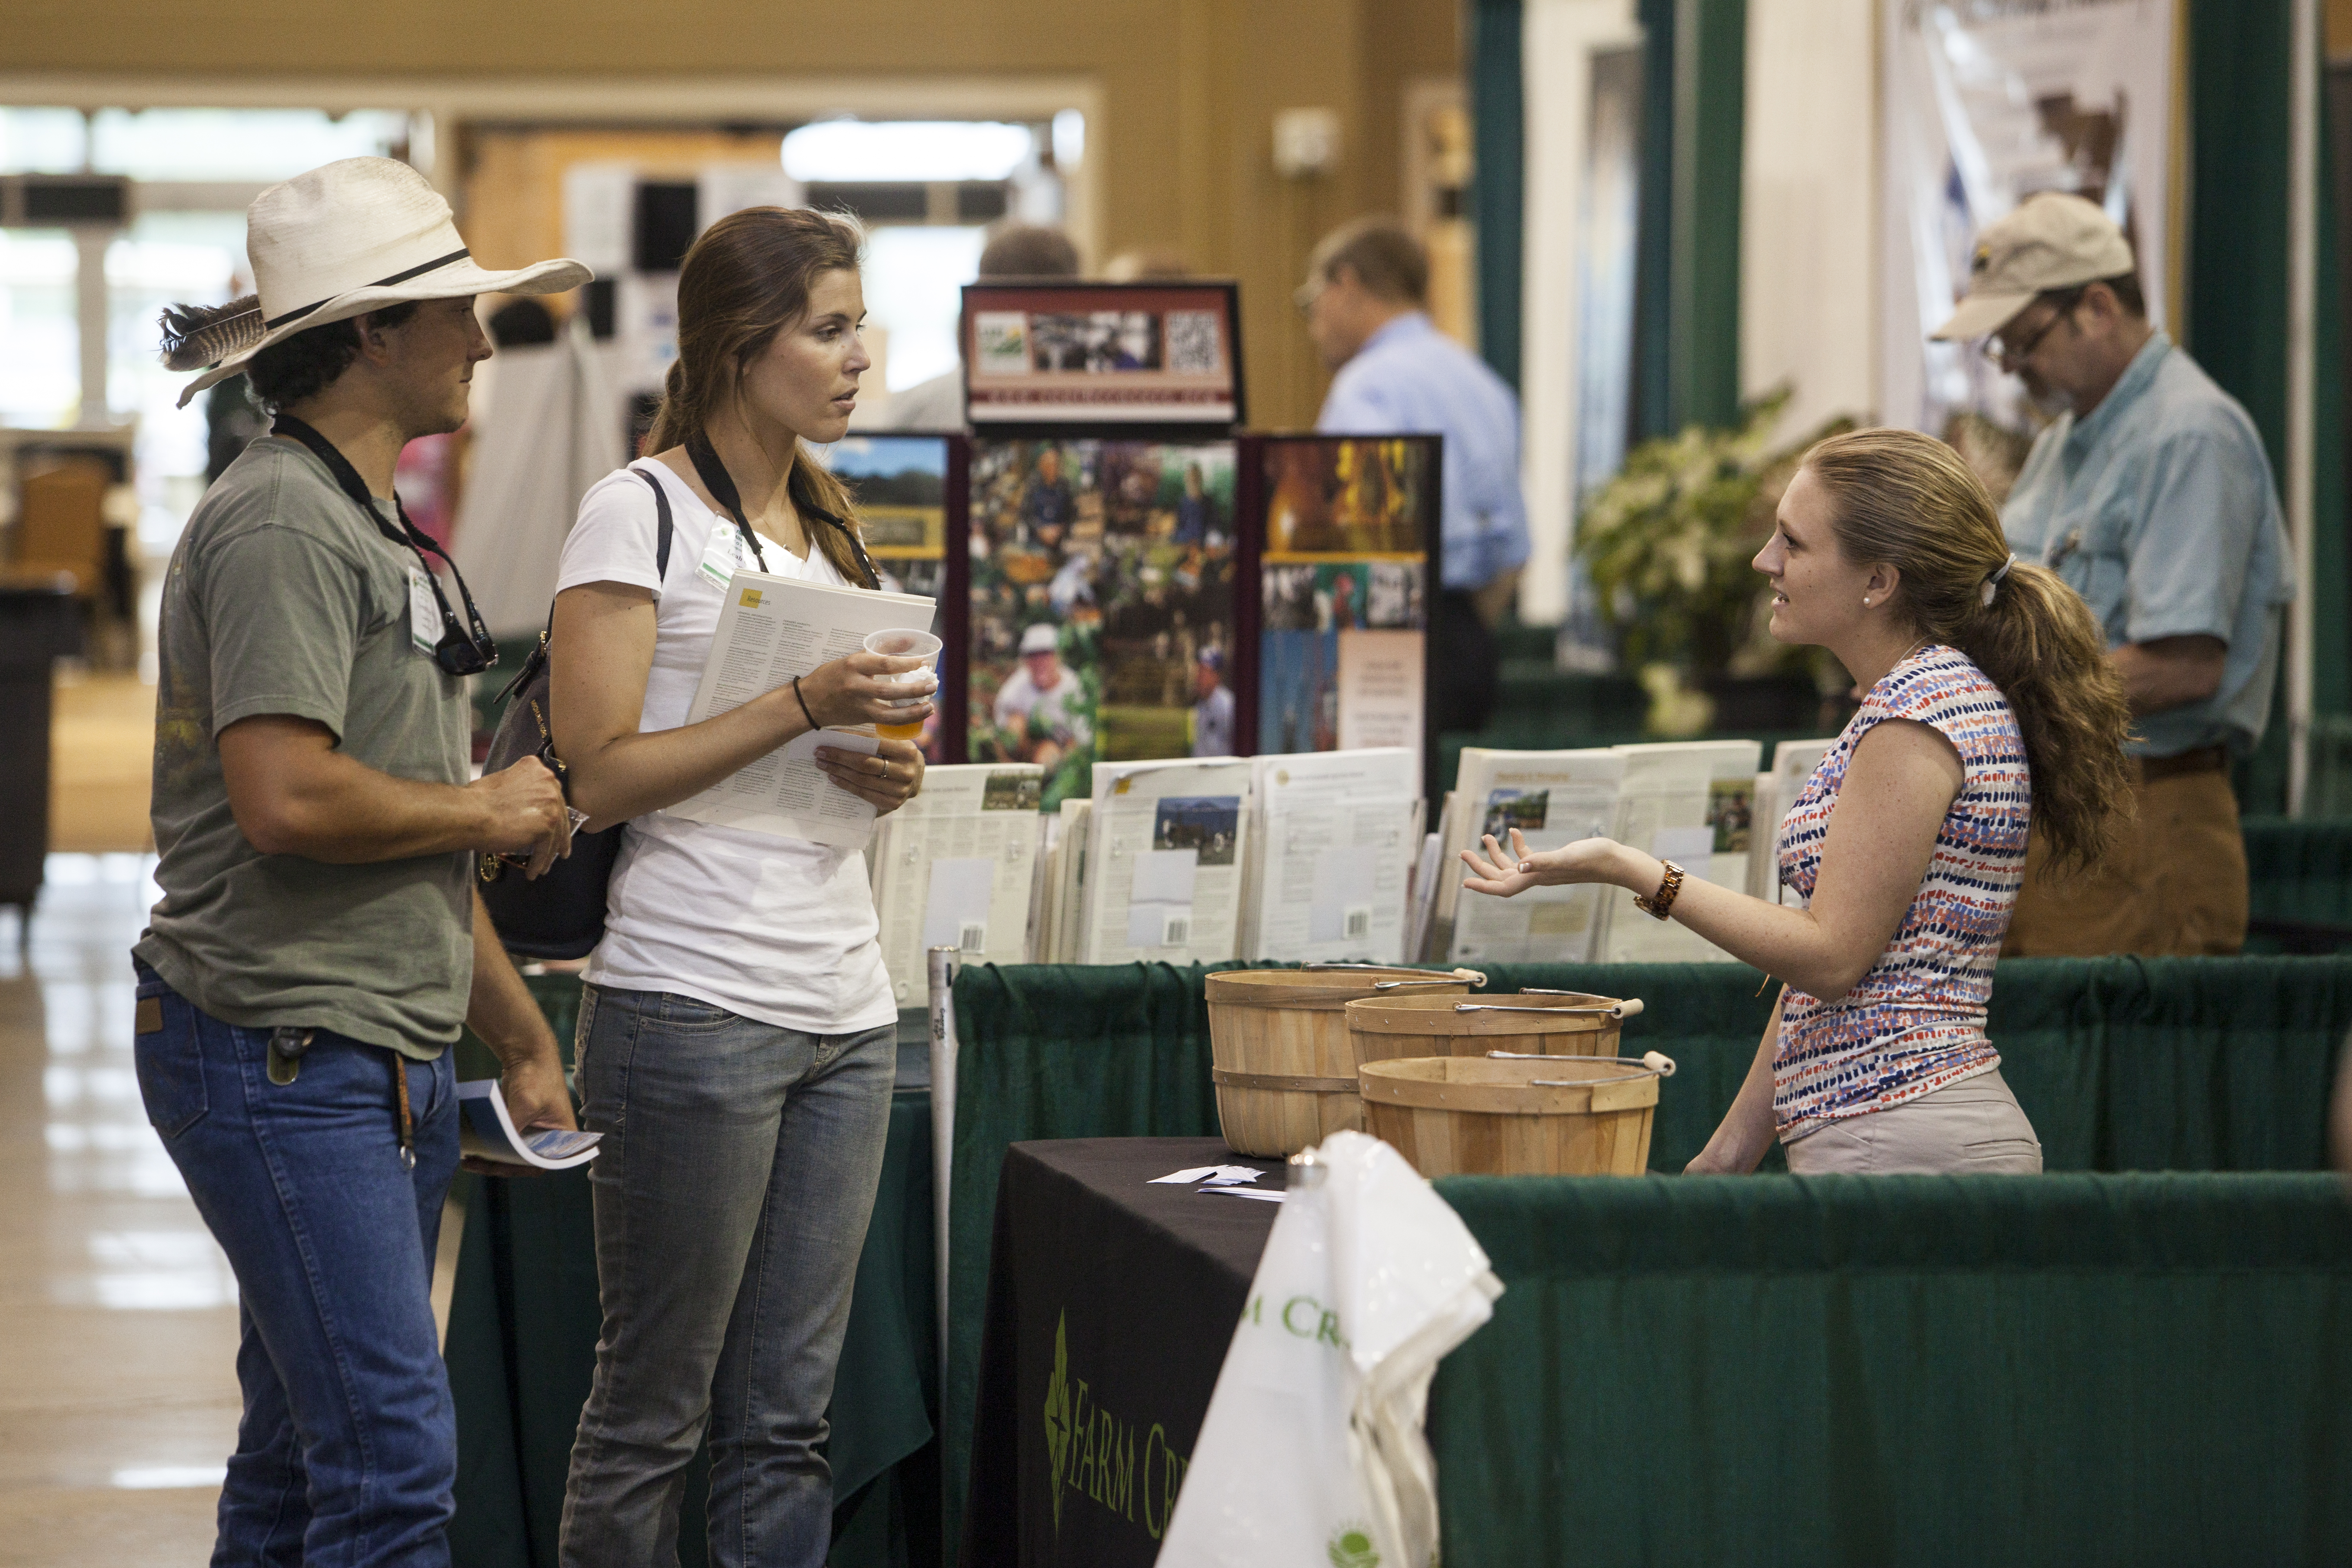 2014 Small Farms Conference in Kissimmee, Florida on Friday and Saturday, July 1st and 2nd.